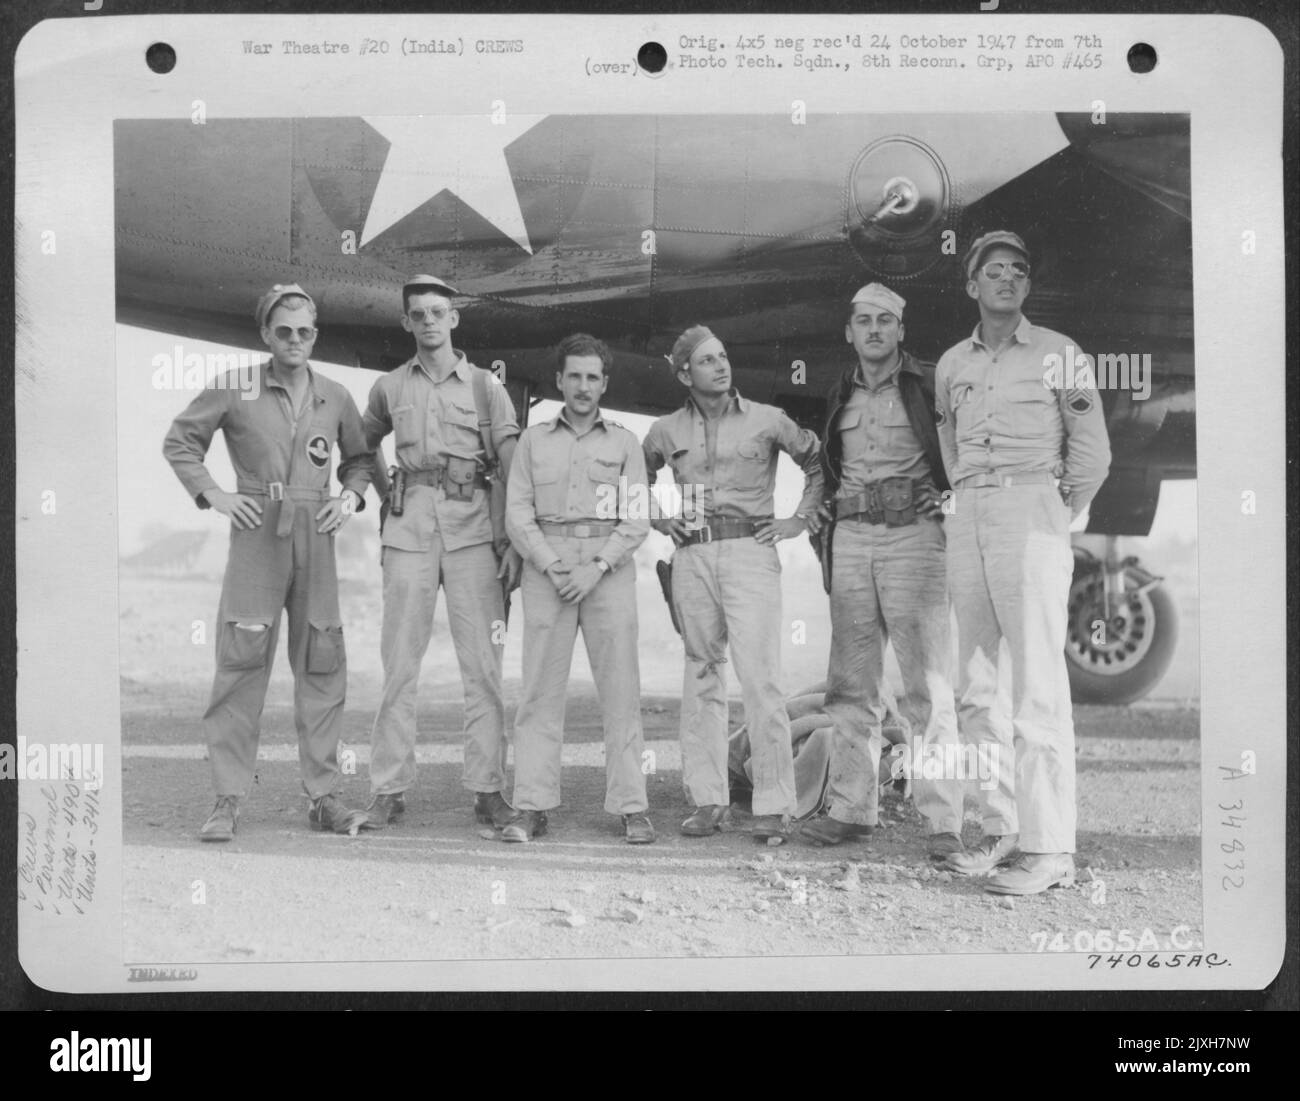 Major J. A. Philpott, Commanding Officer Of The 490Th Bomb Squadron, 341St Bomb Group And Crew Pose Beside Their Plane At Ondal Airfield, India. 15 March 1943. They Are, Left To Right: Major Phipott, Pilot; 1St Lt. Rider, Bombardier; 1St Lt. Zeidler, Bo Stock Photo